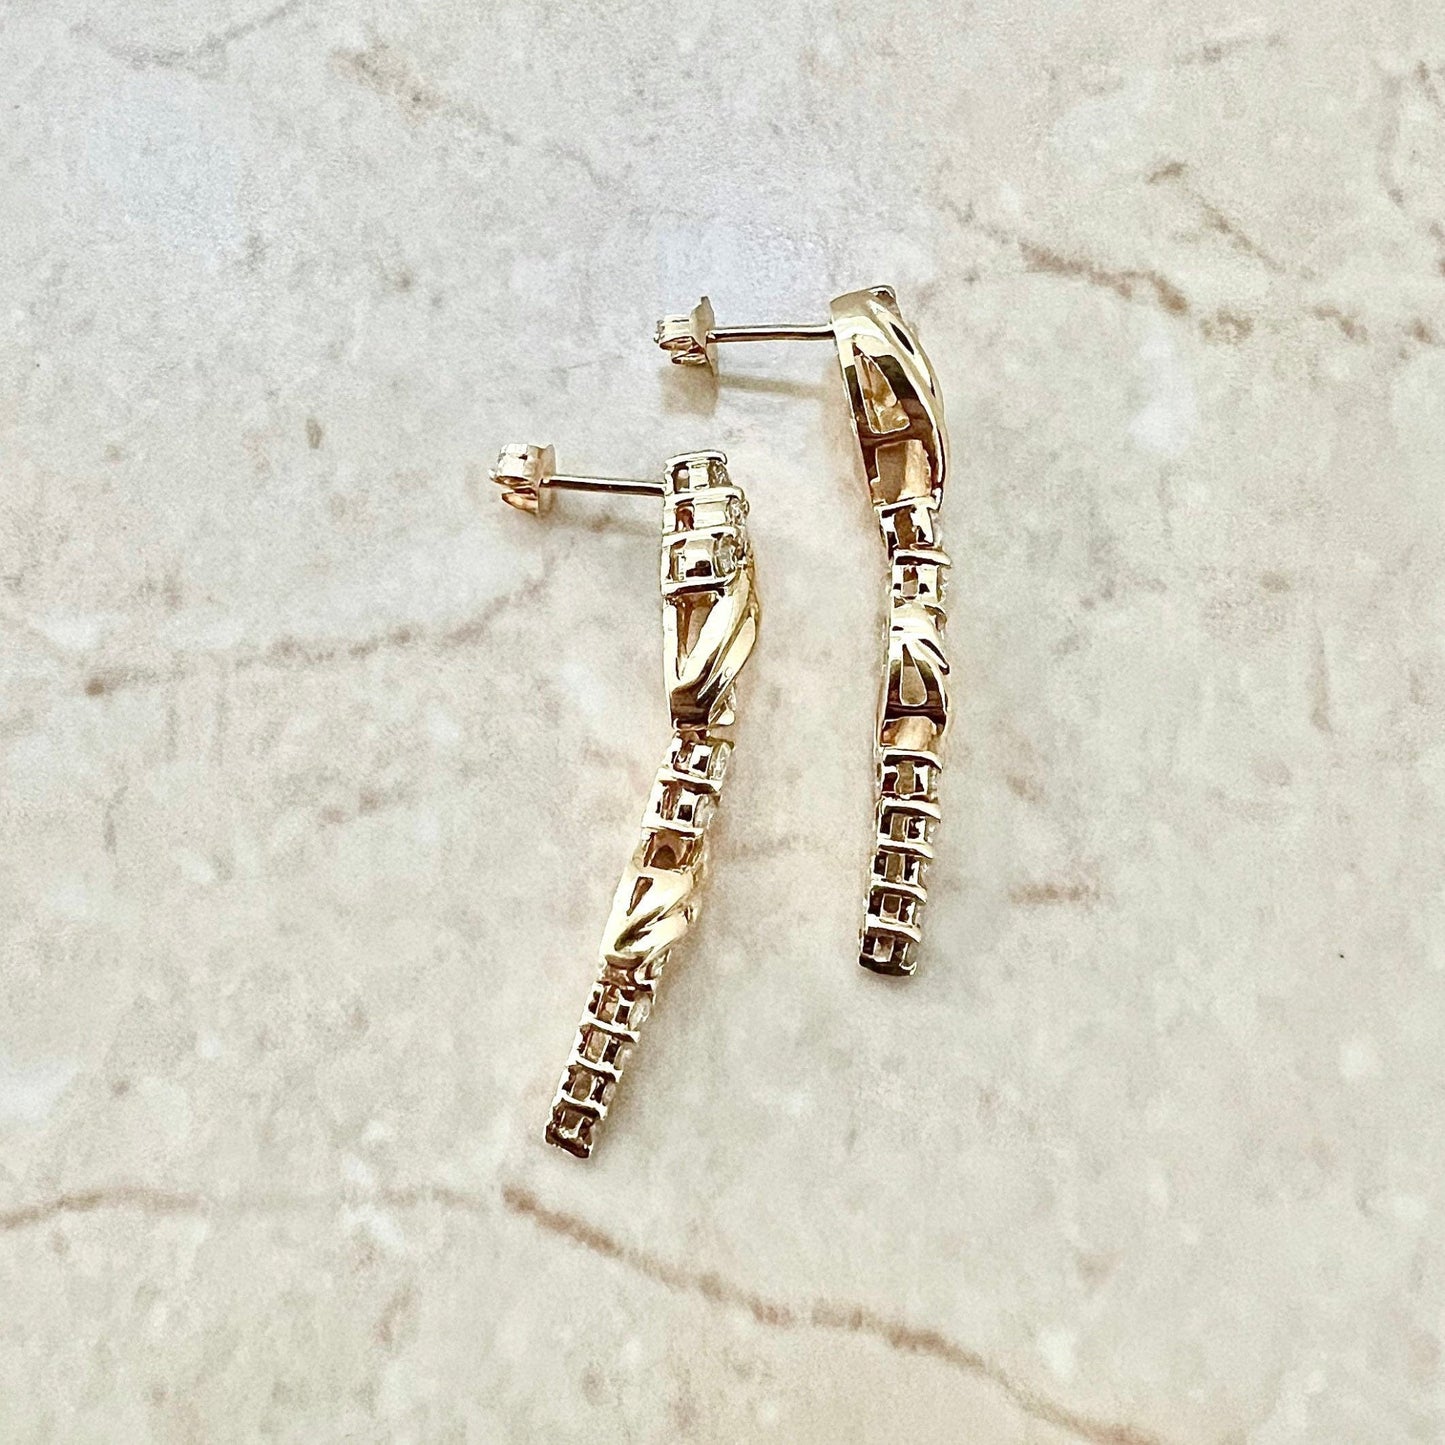 Vintage 14K Diamond Drop Earrings - Yellow Gold Dangling Earrings - Diamond Earrings - Best Gifts For Her - Anniversary Gift - Gifts For Mom